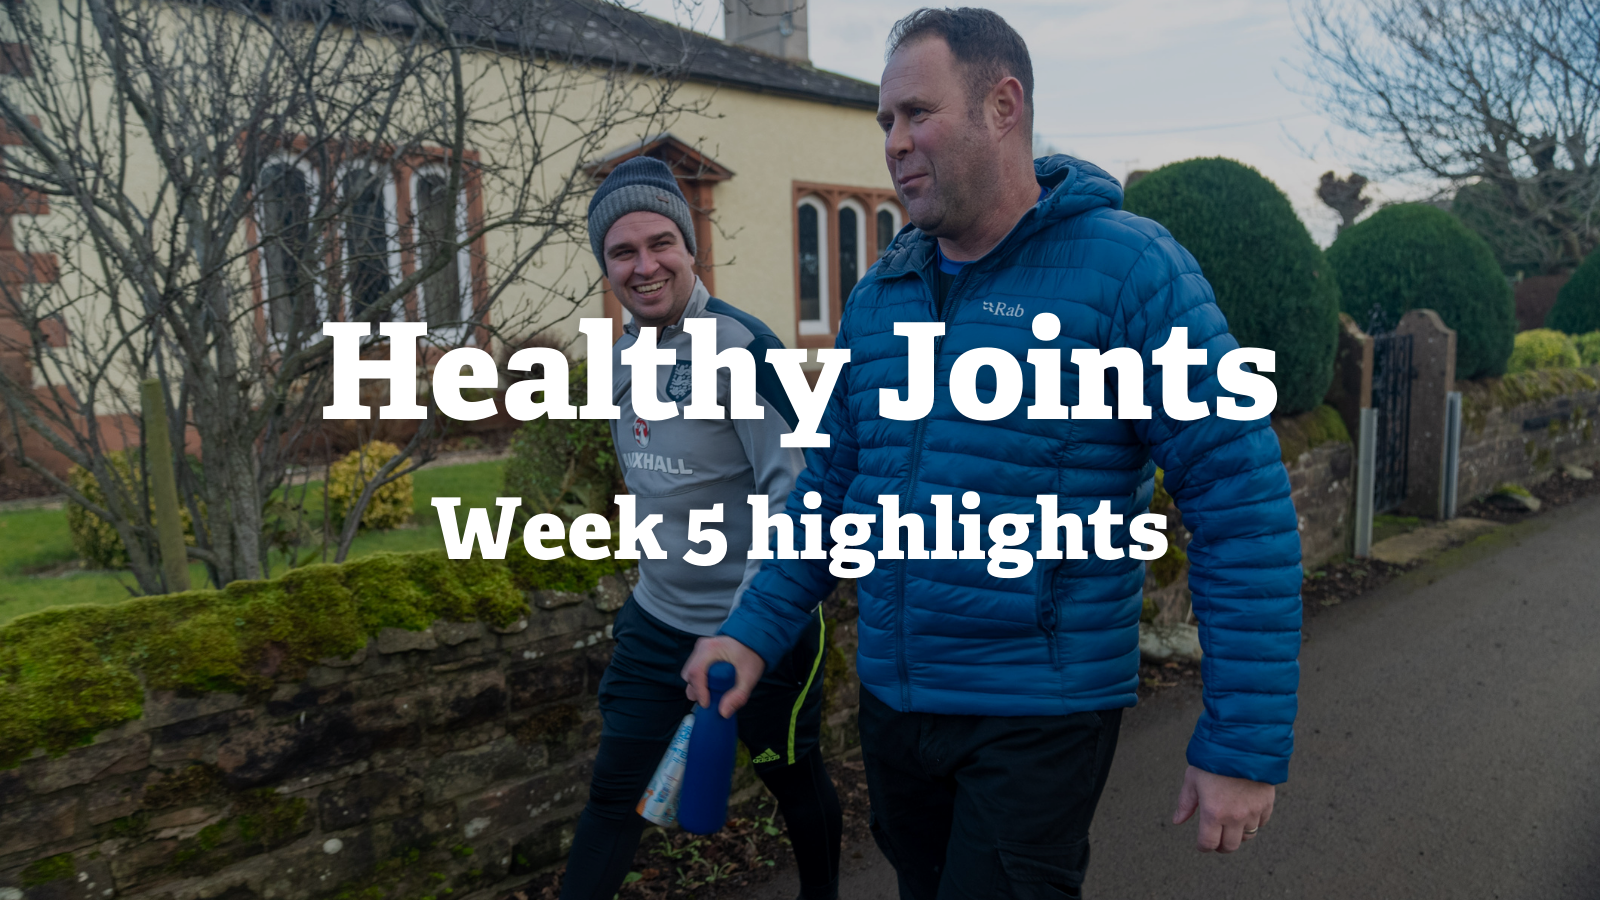 Healthy joints: week 5 highlights